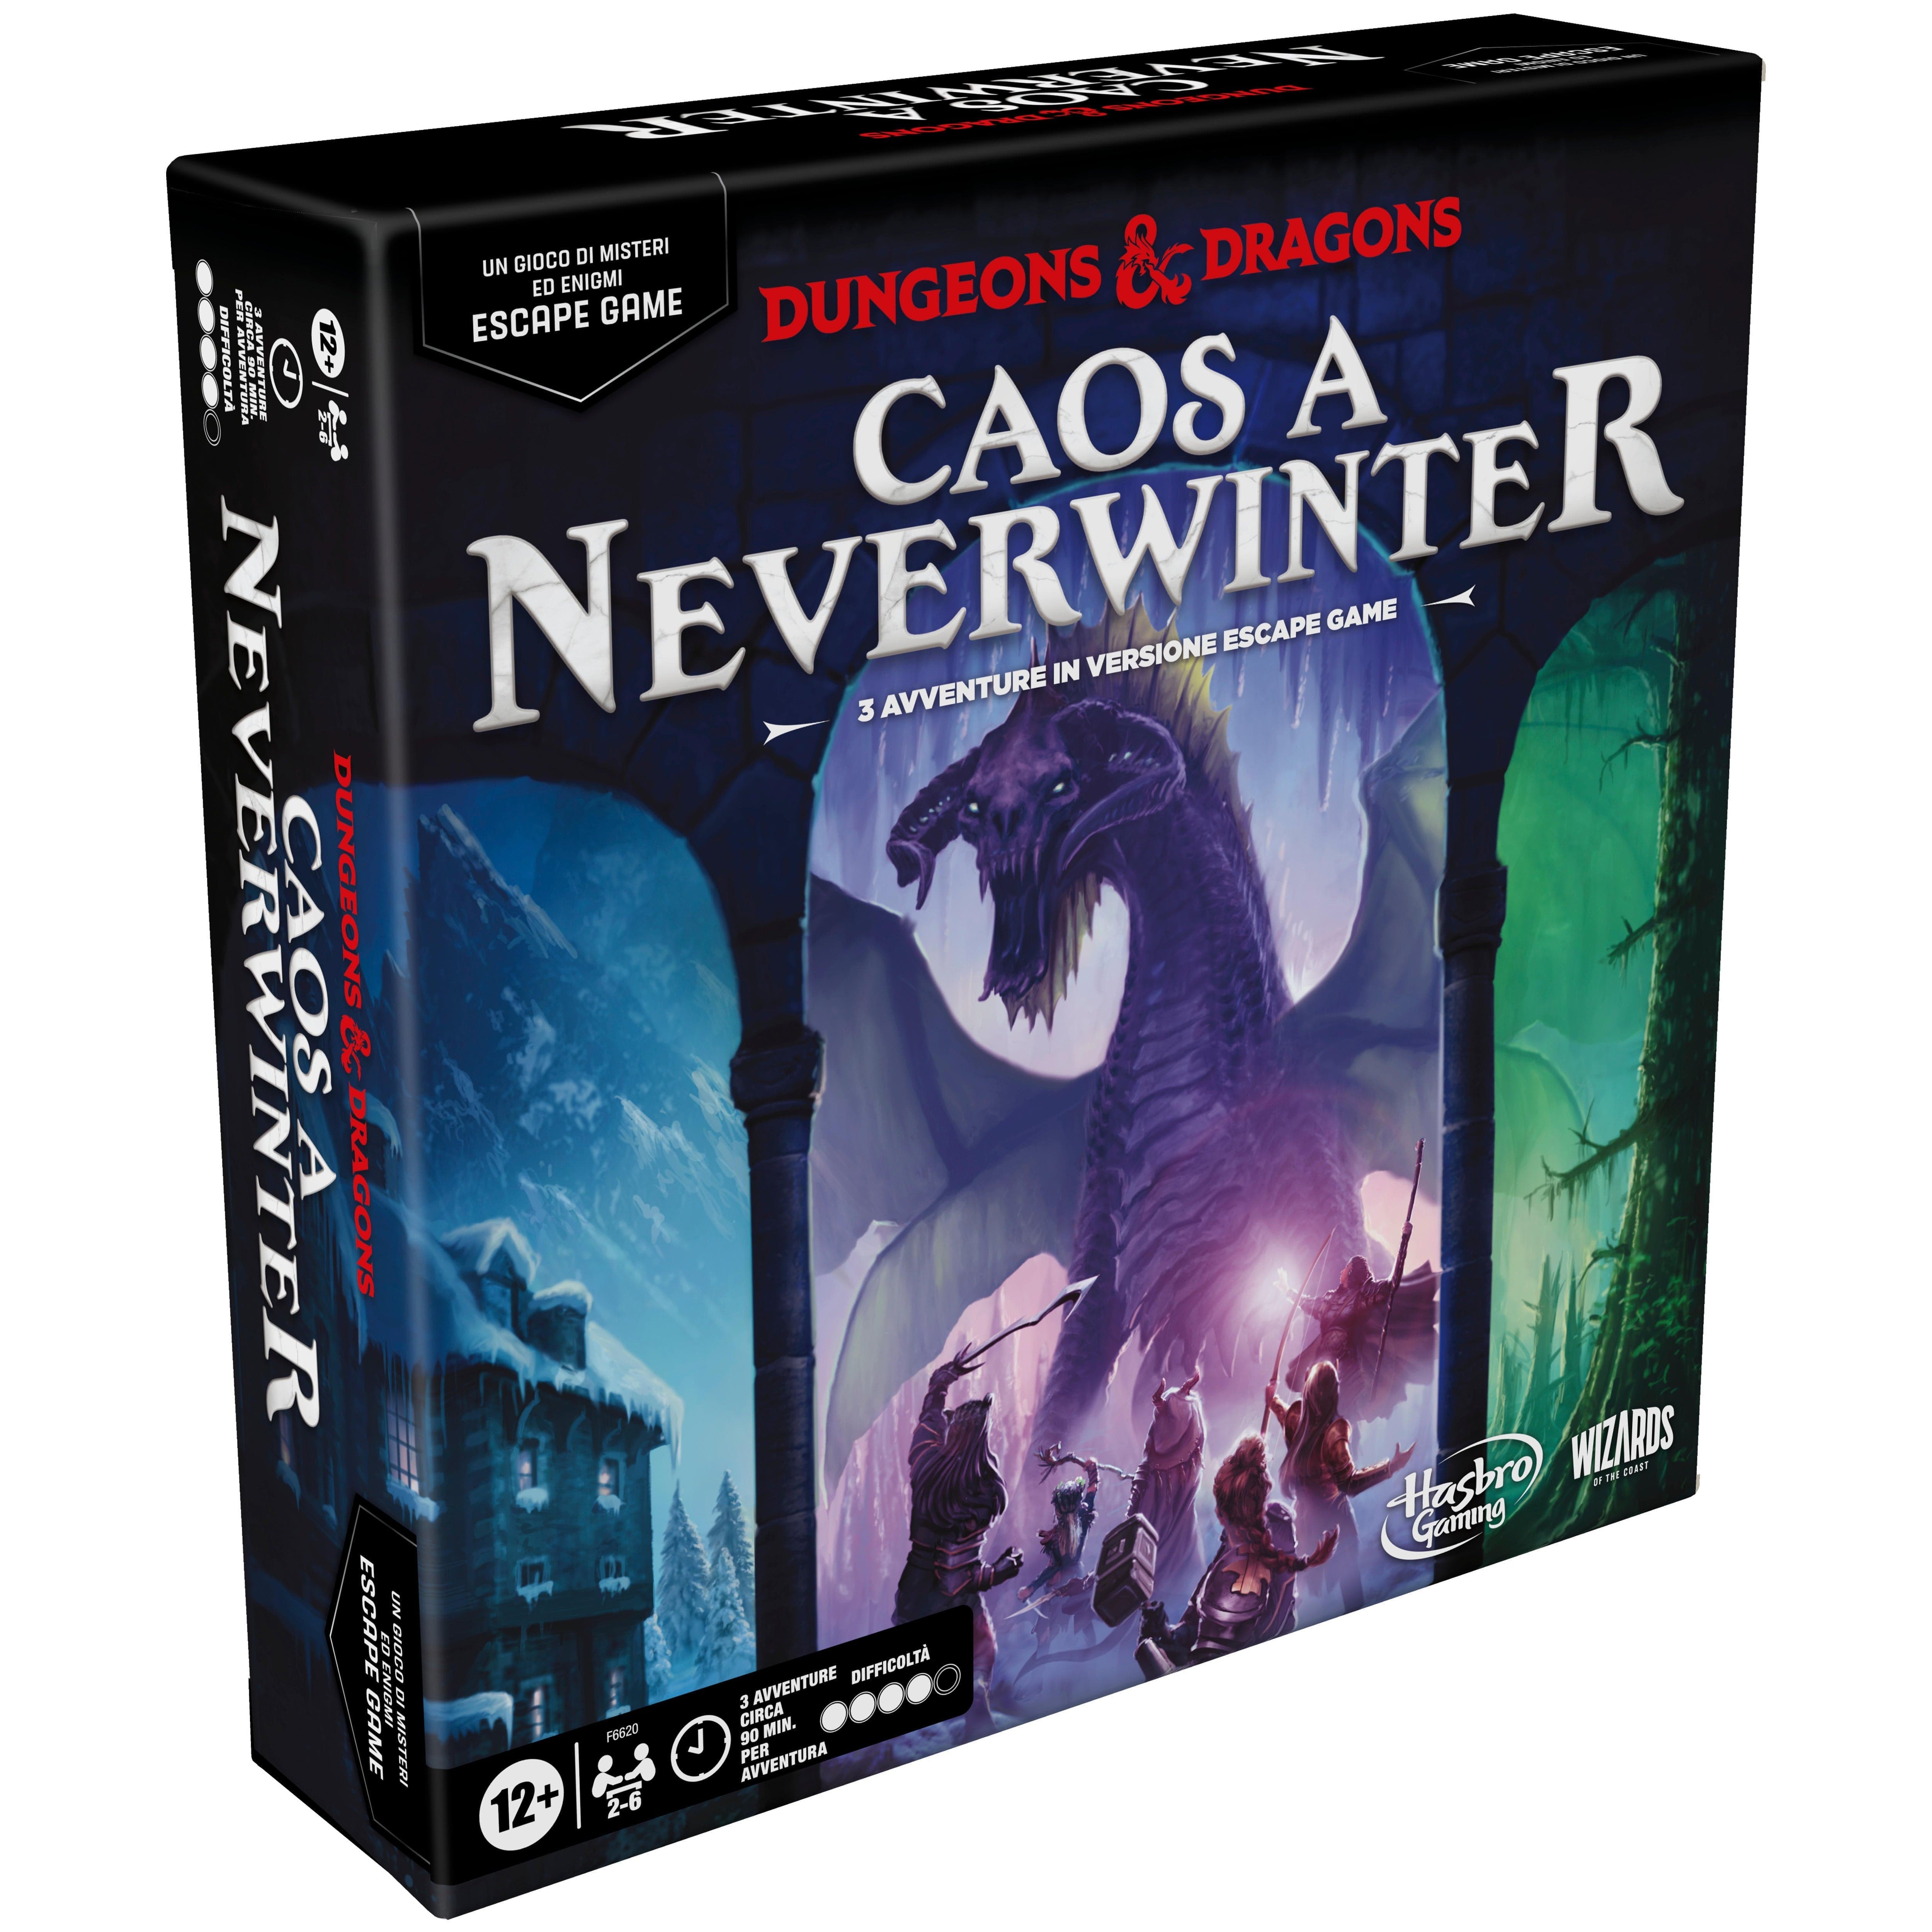 Dungeons & Dragons Escape Game Caos A Neverwinter